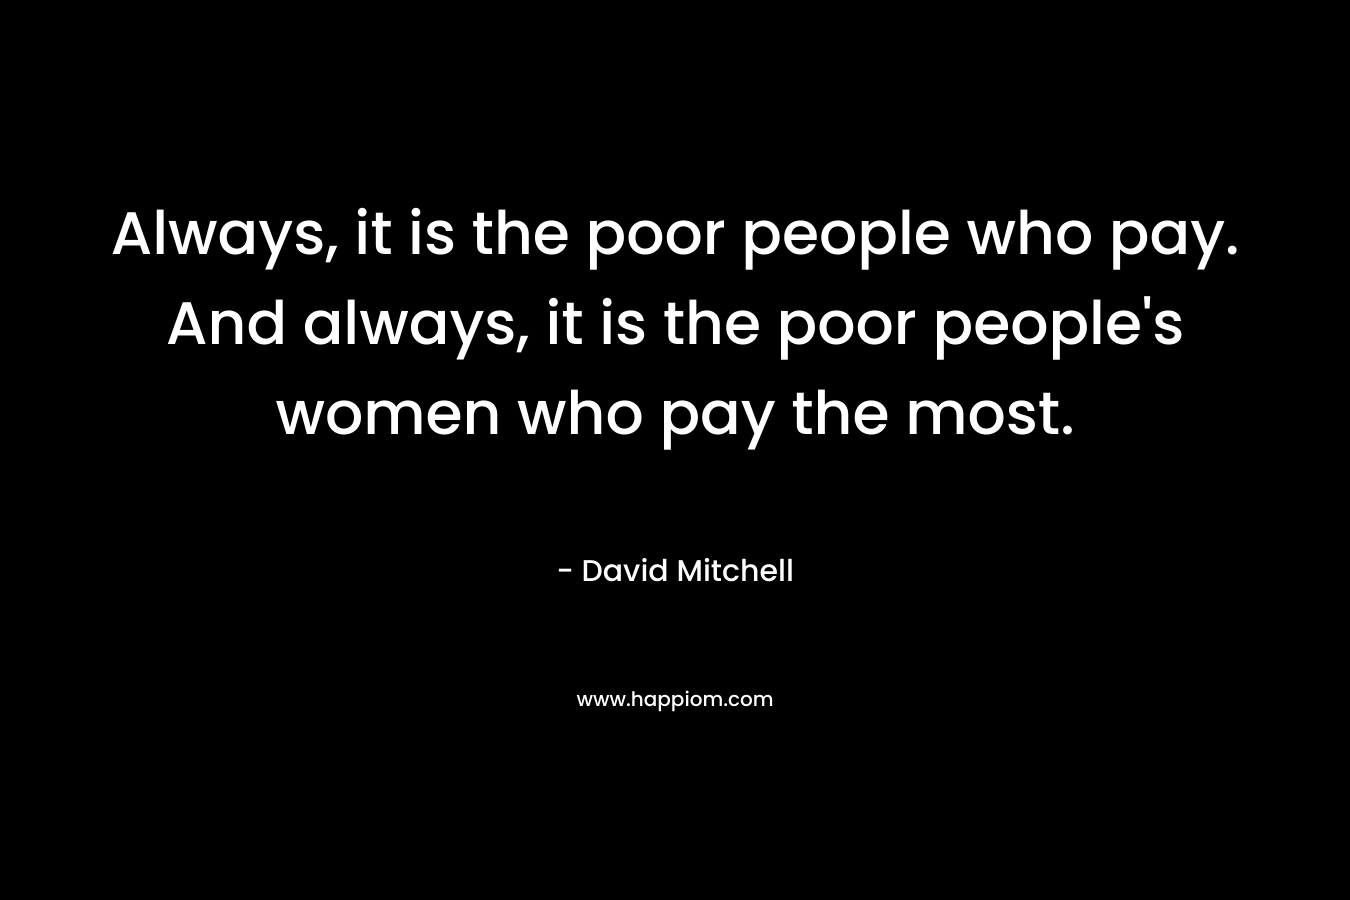 Always, it is the poor people who pay. And always, it is the poor people's women who pay the most.